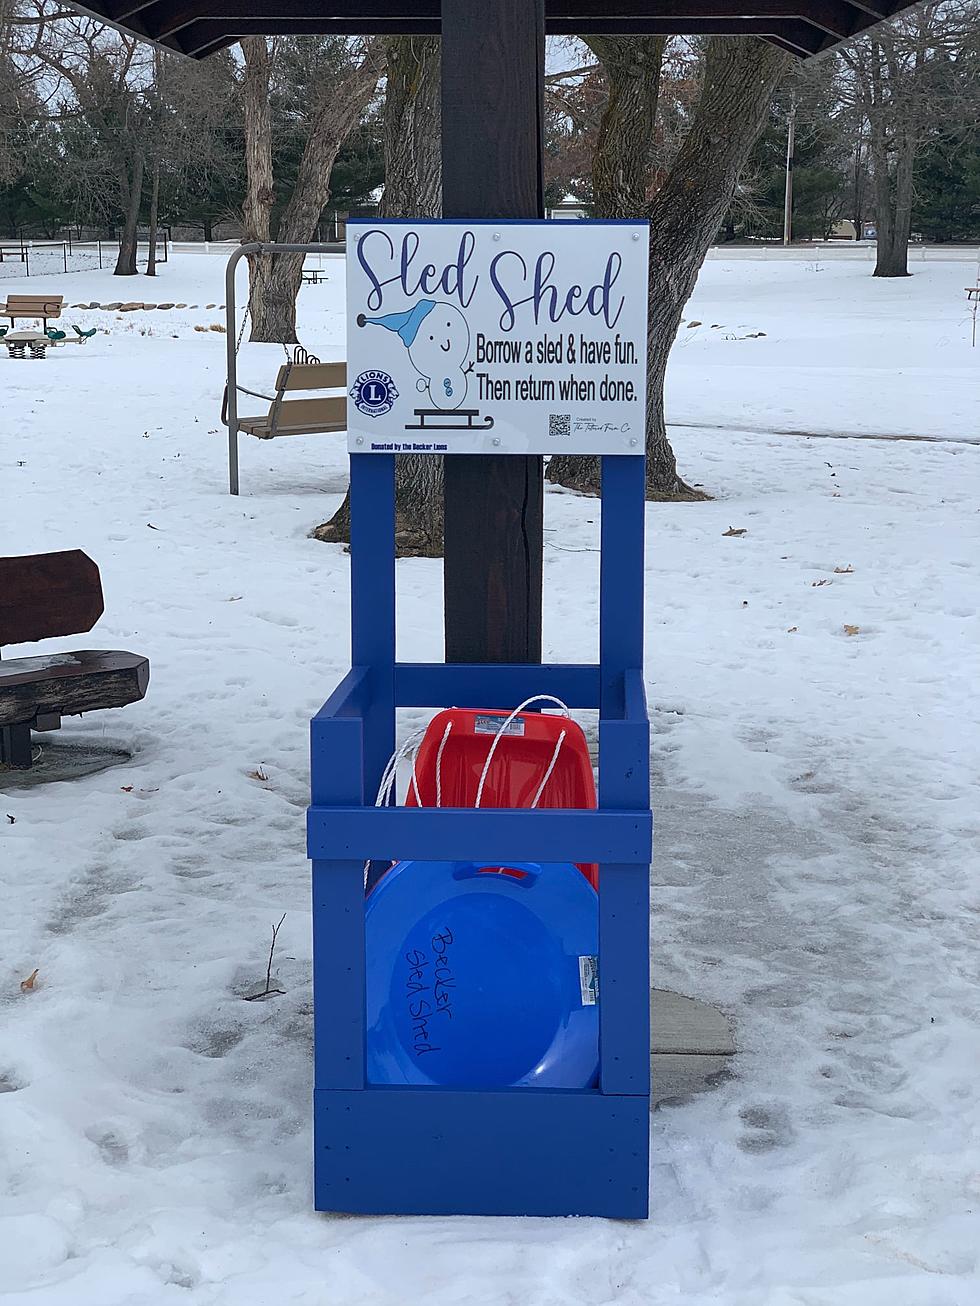 City of Becker Adds A Community ‘Sled Shed’